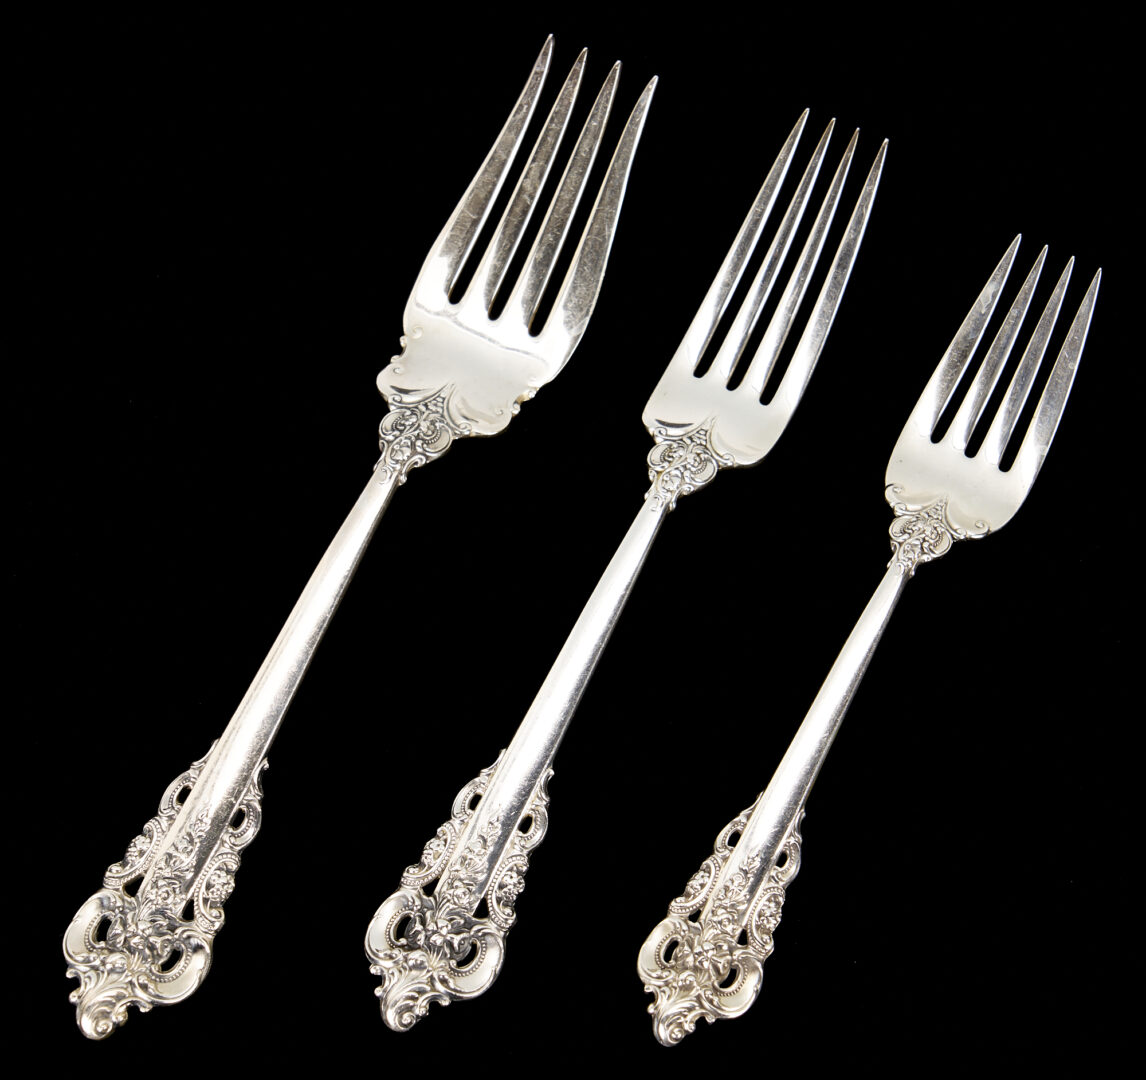 Lot 54: 119 pcs Wallace Grand Baroque Sterling Flatware, Service for 16 & 1 Extra